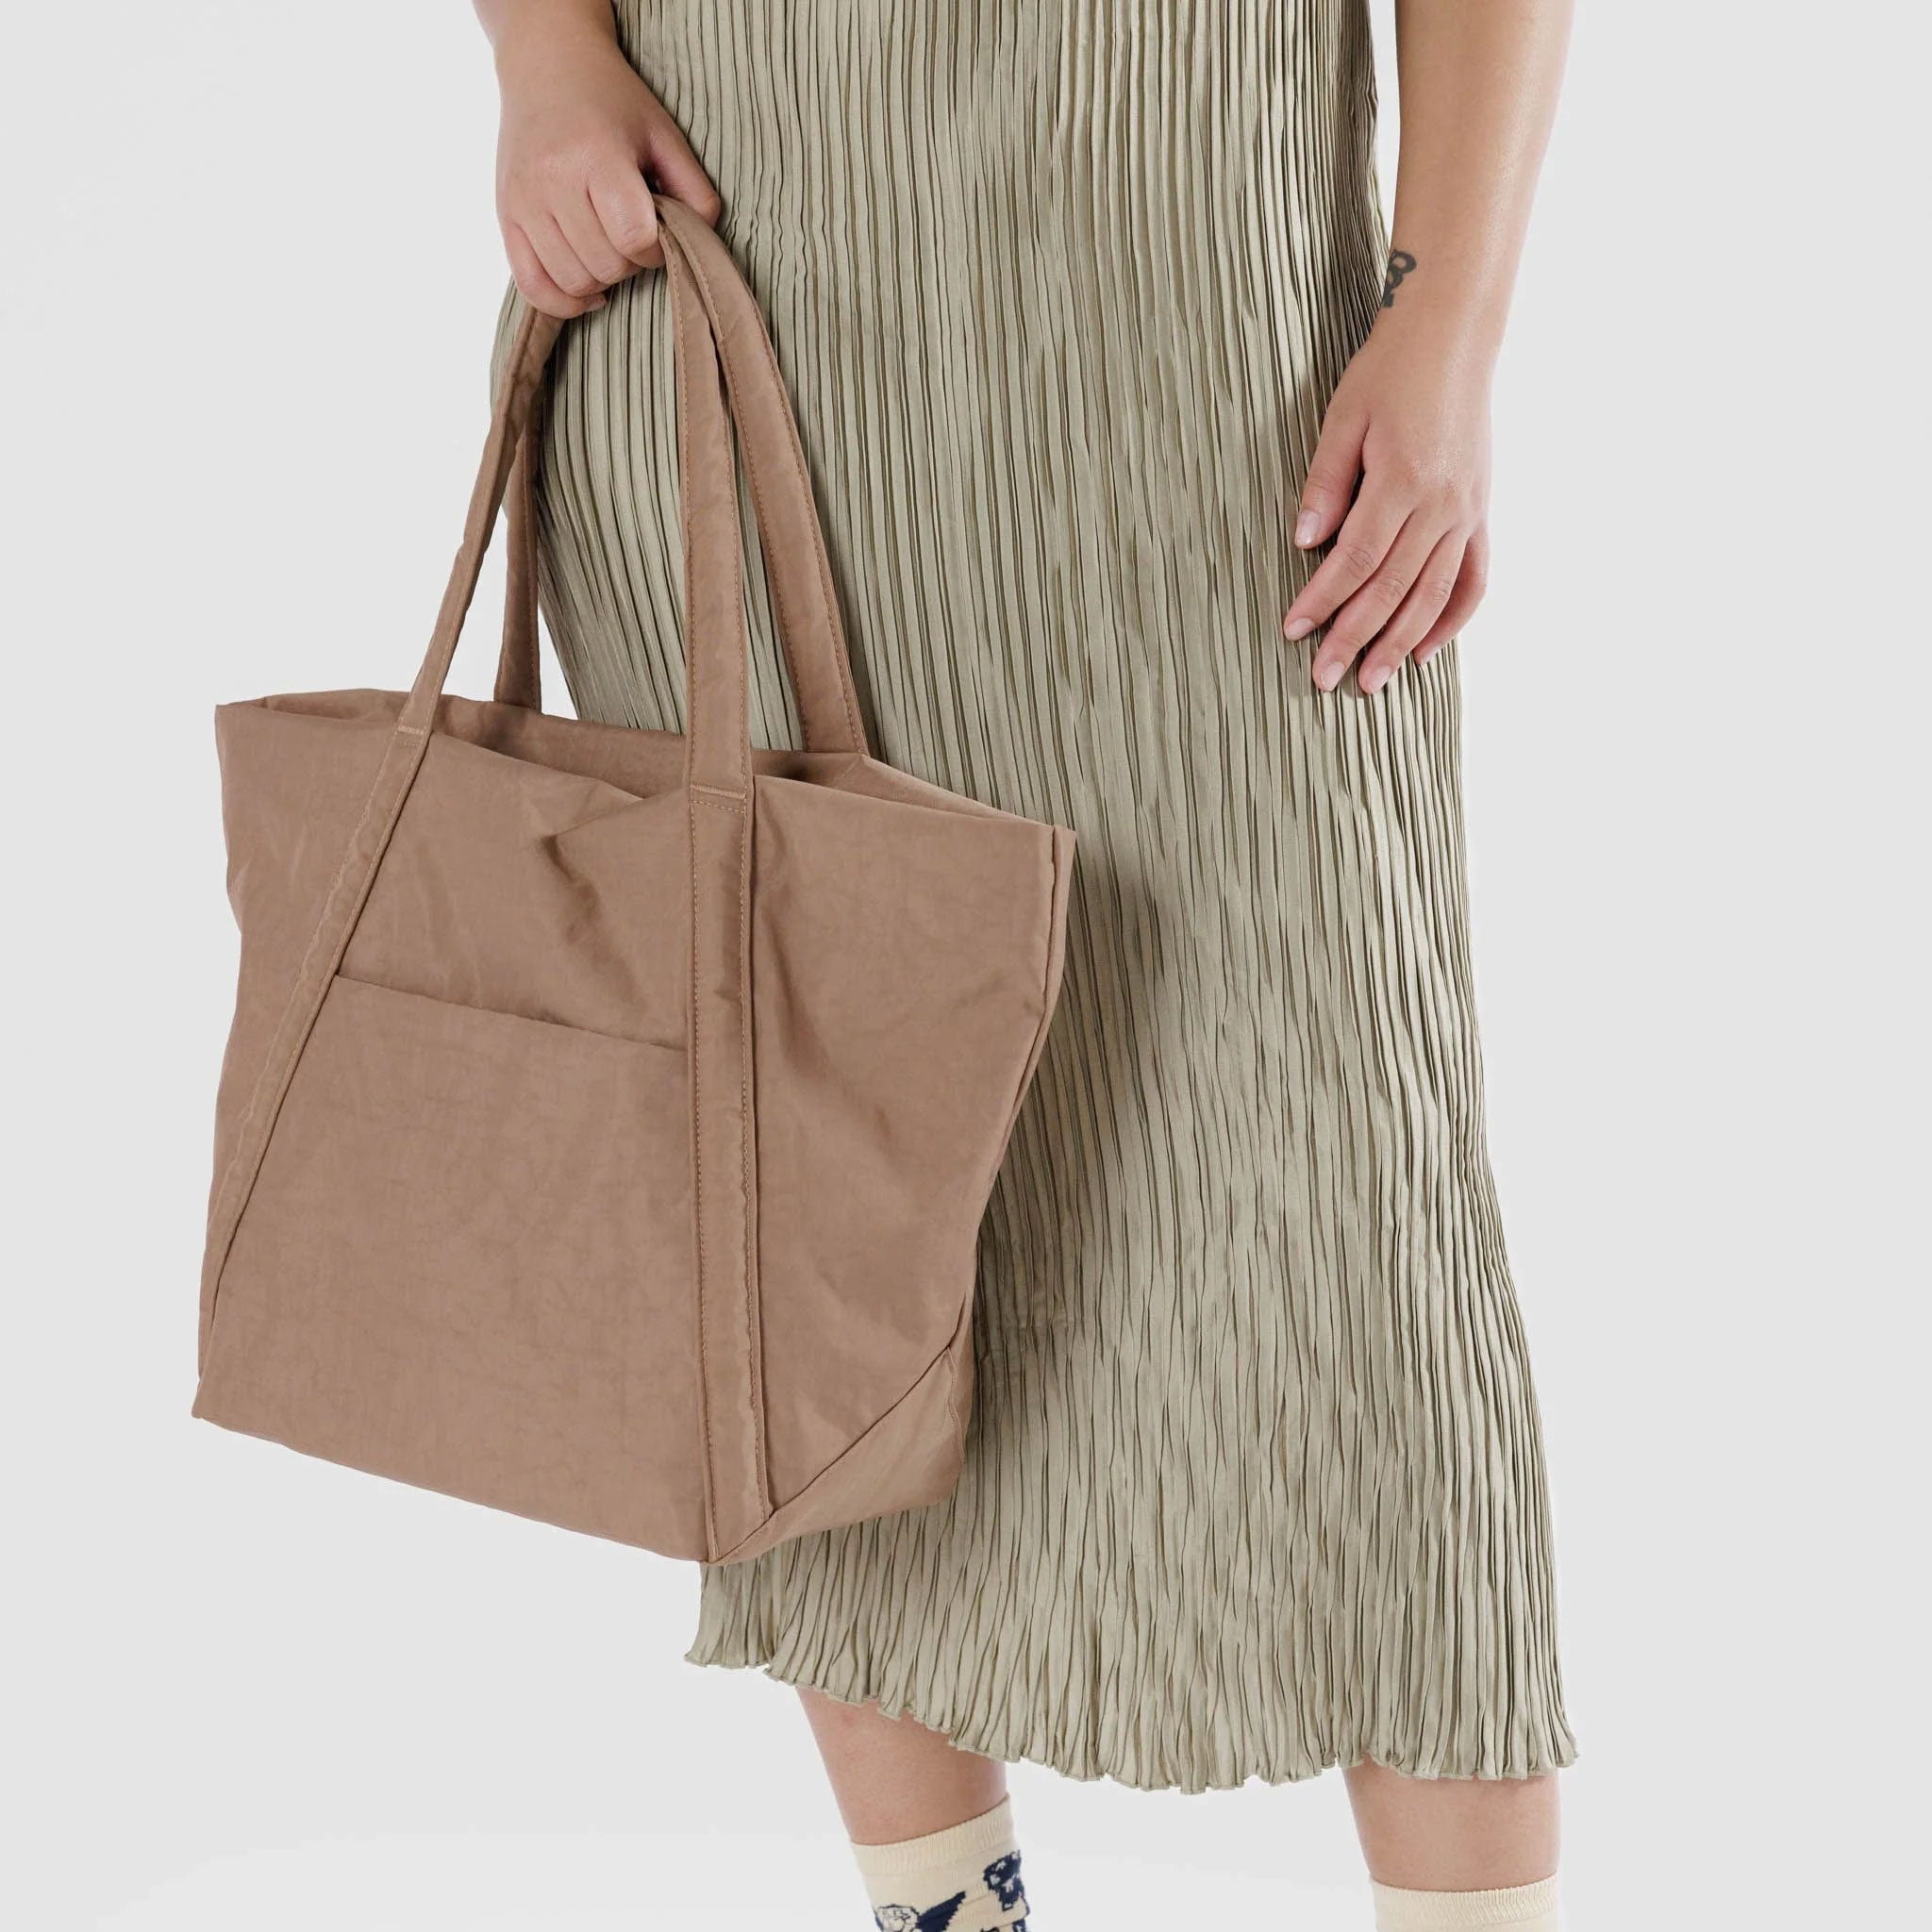 On a white background is a light brown nylon puffy tote bag with shoulder straps.